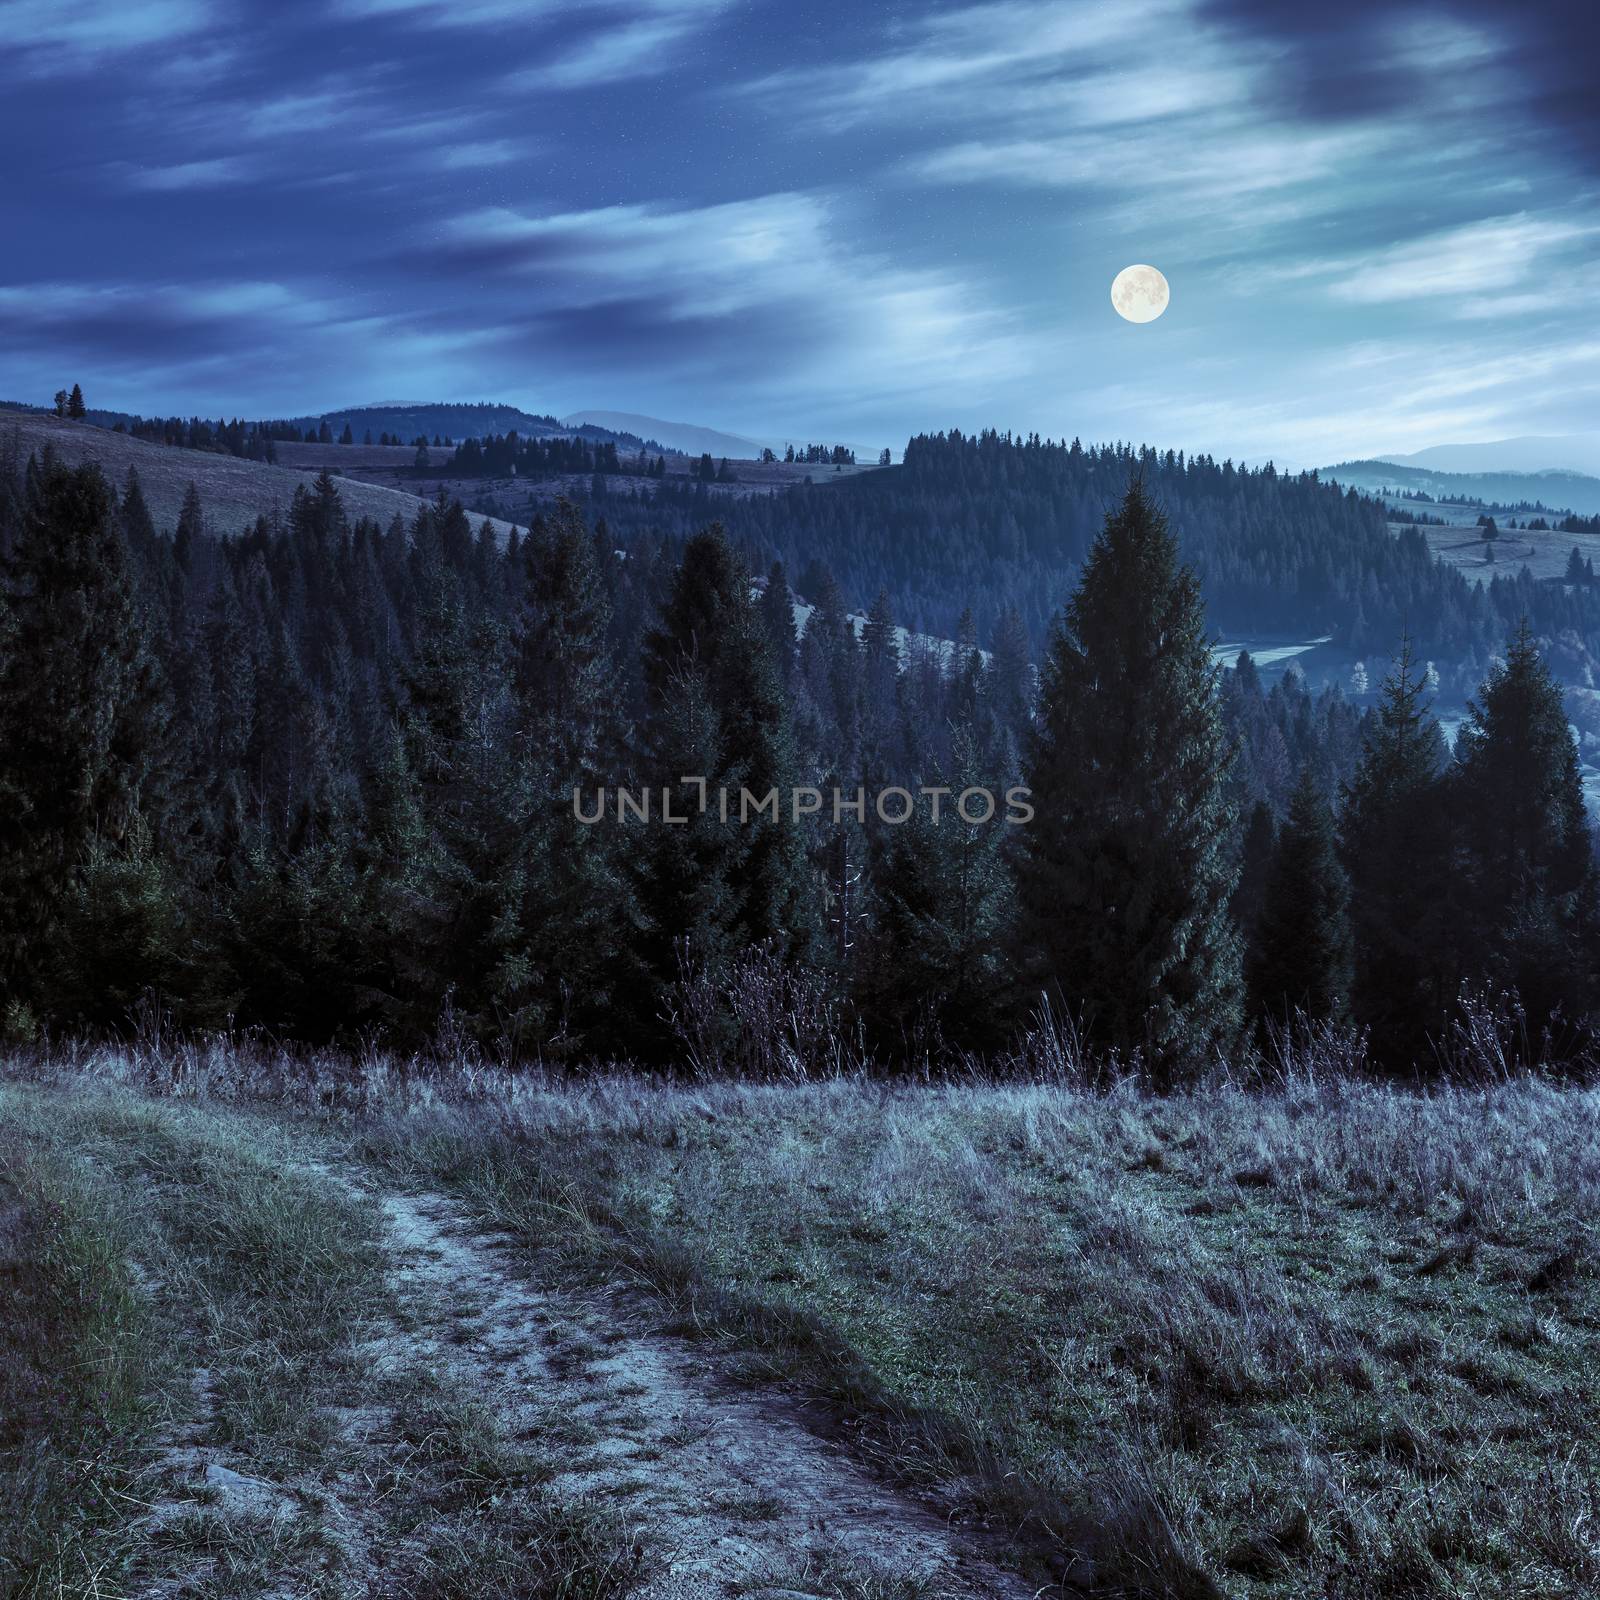 composite image of hillside of mountain range with coniferous forest and meadow path at night in full moon light